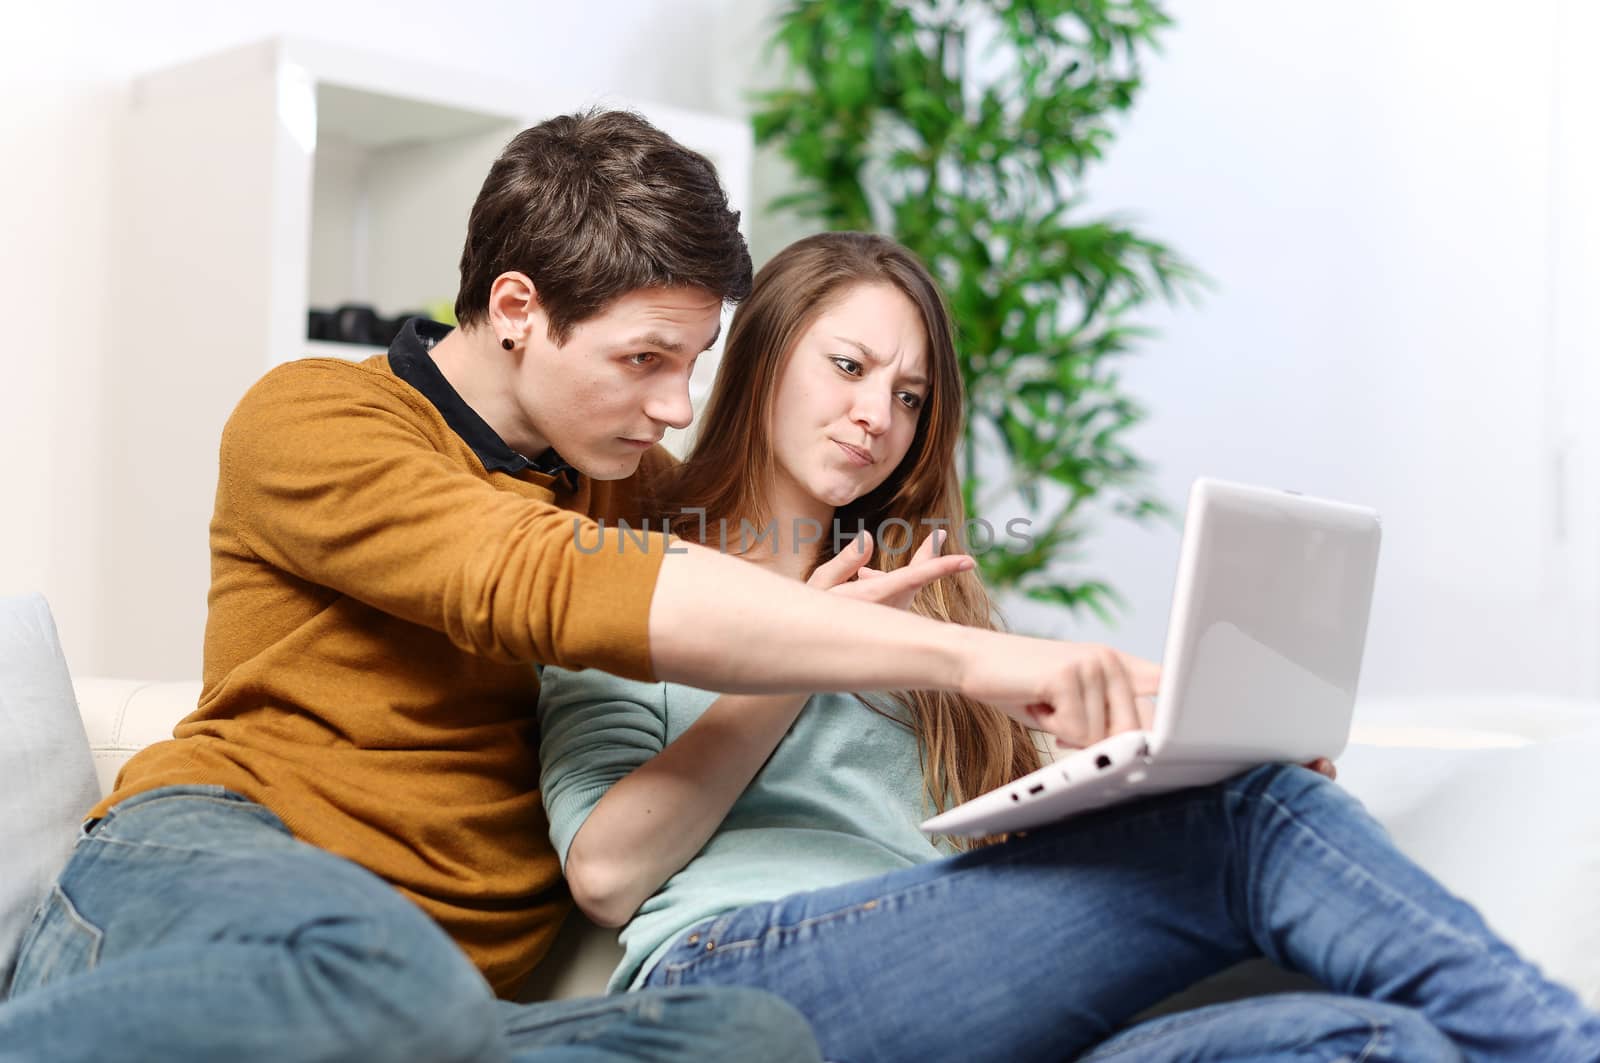 Couple of lovers uses a computer with a worried attitude